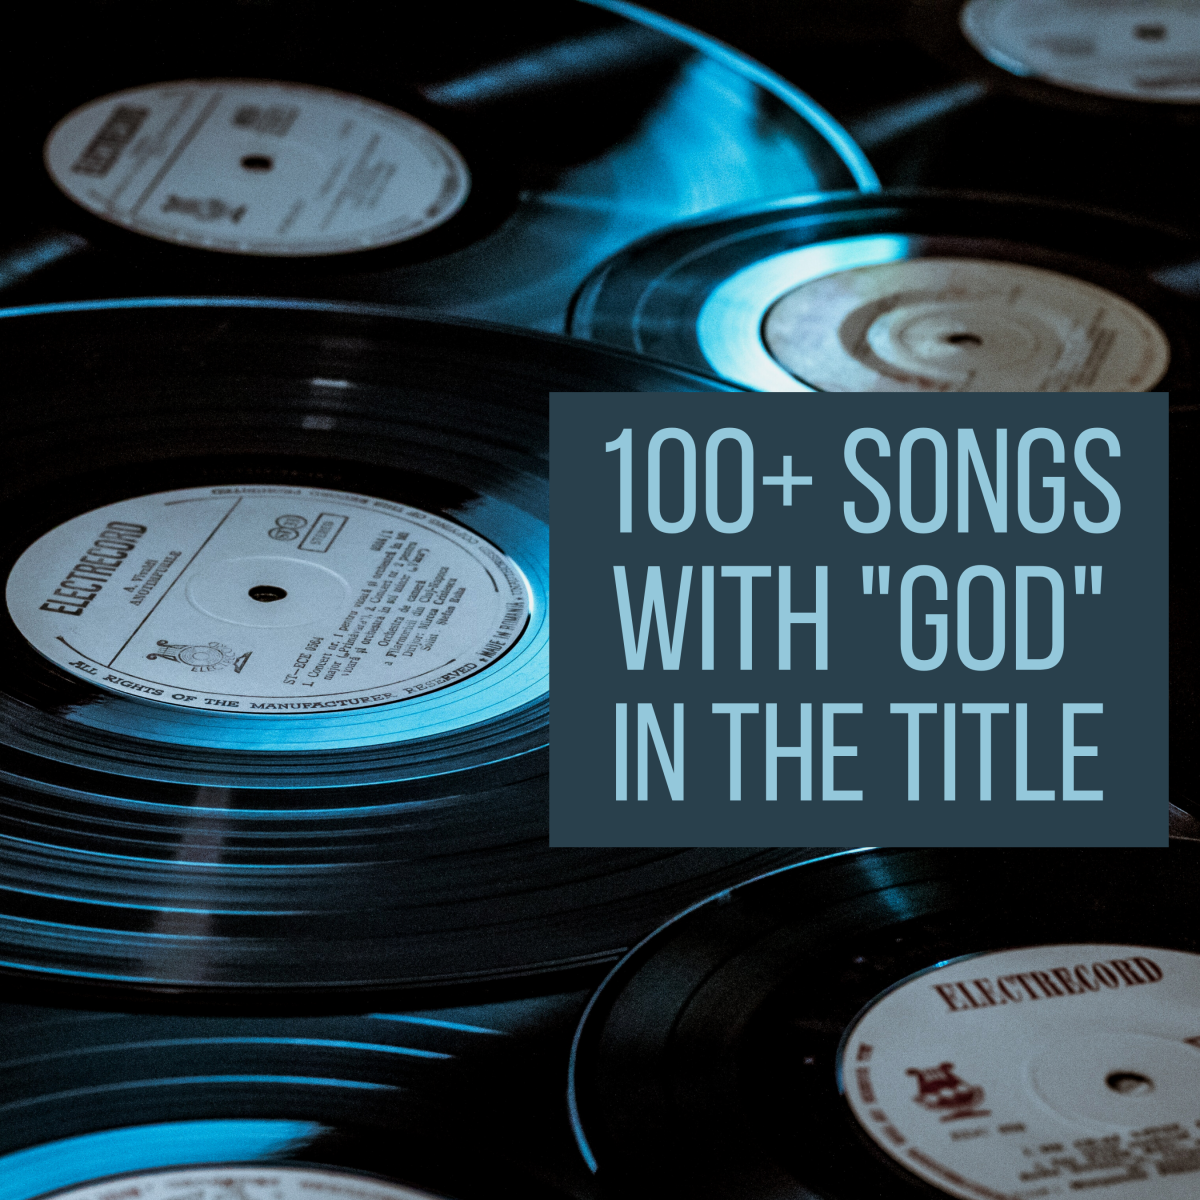 100+ songs with the word "God" in the title.